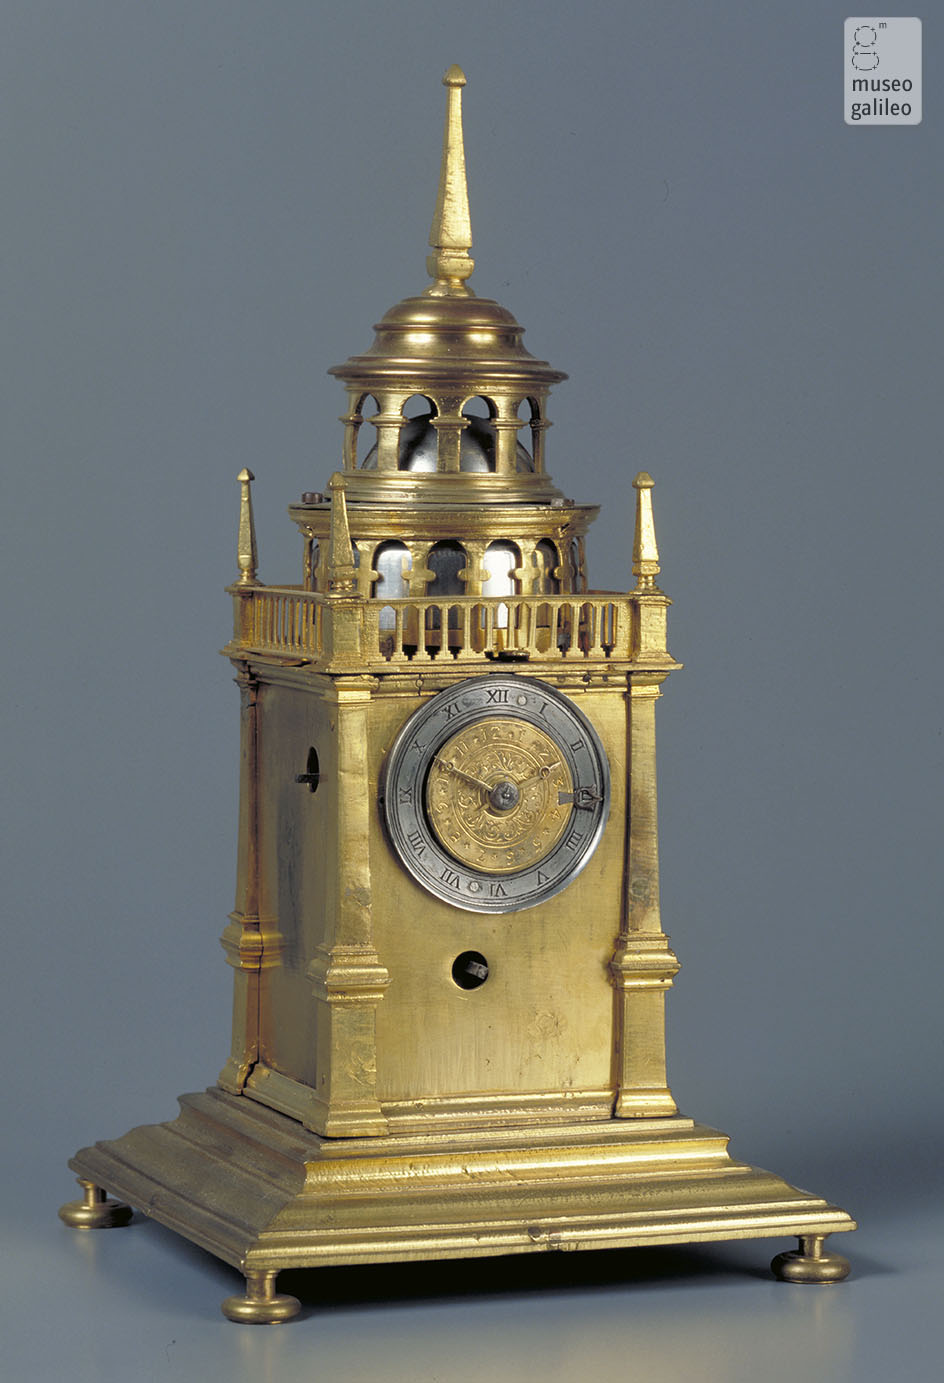 Two-hand pavilion clock (Inv. 3865)